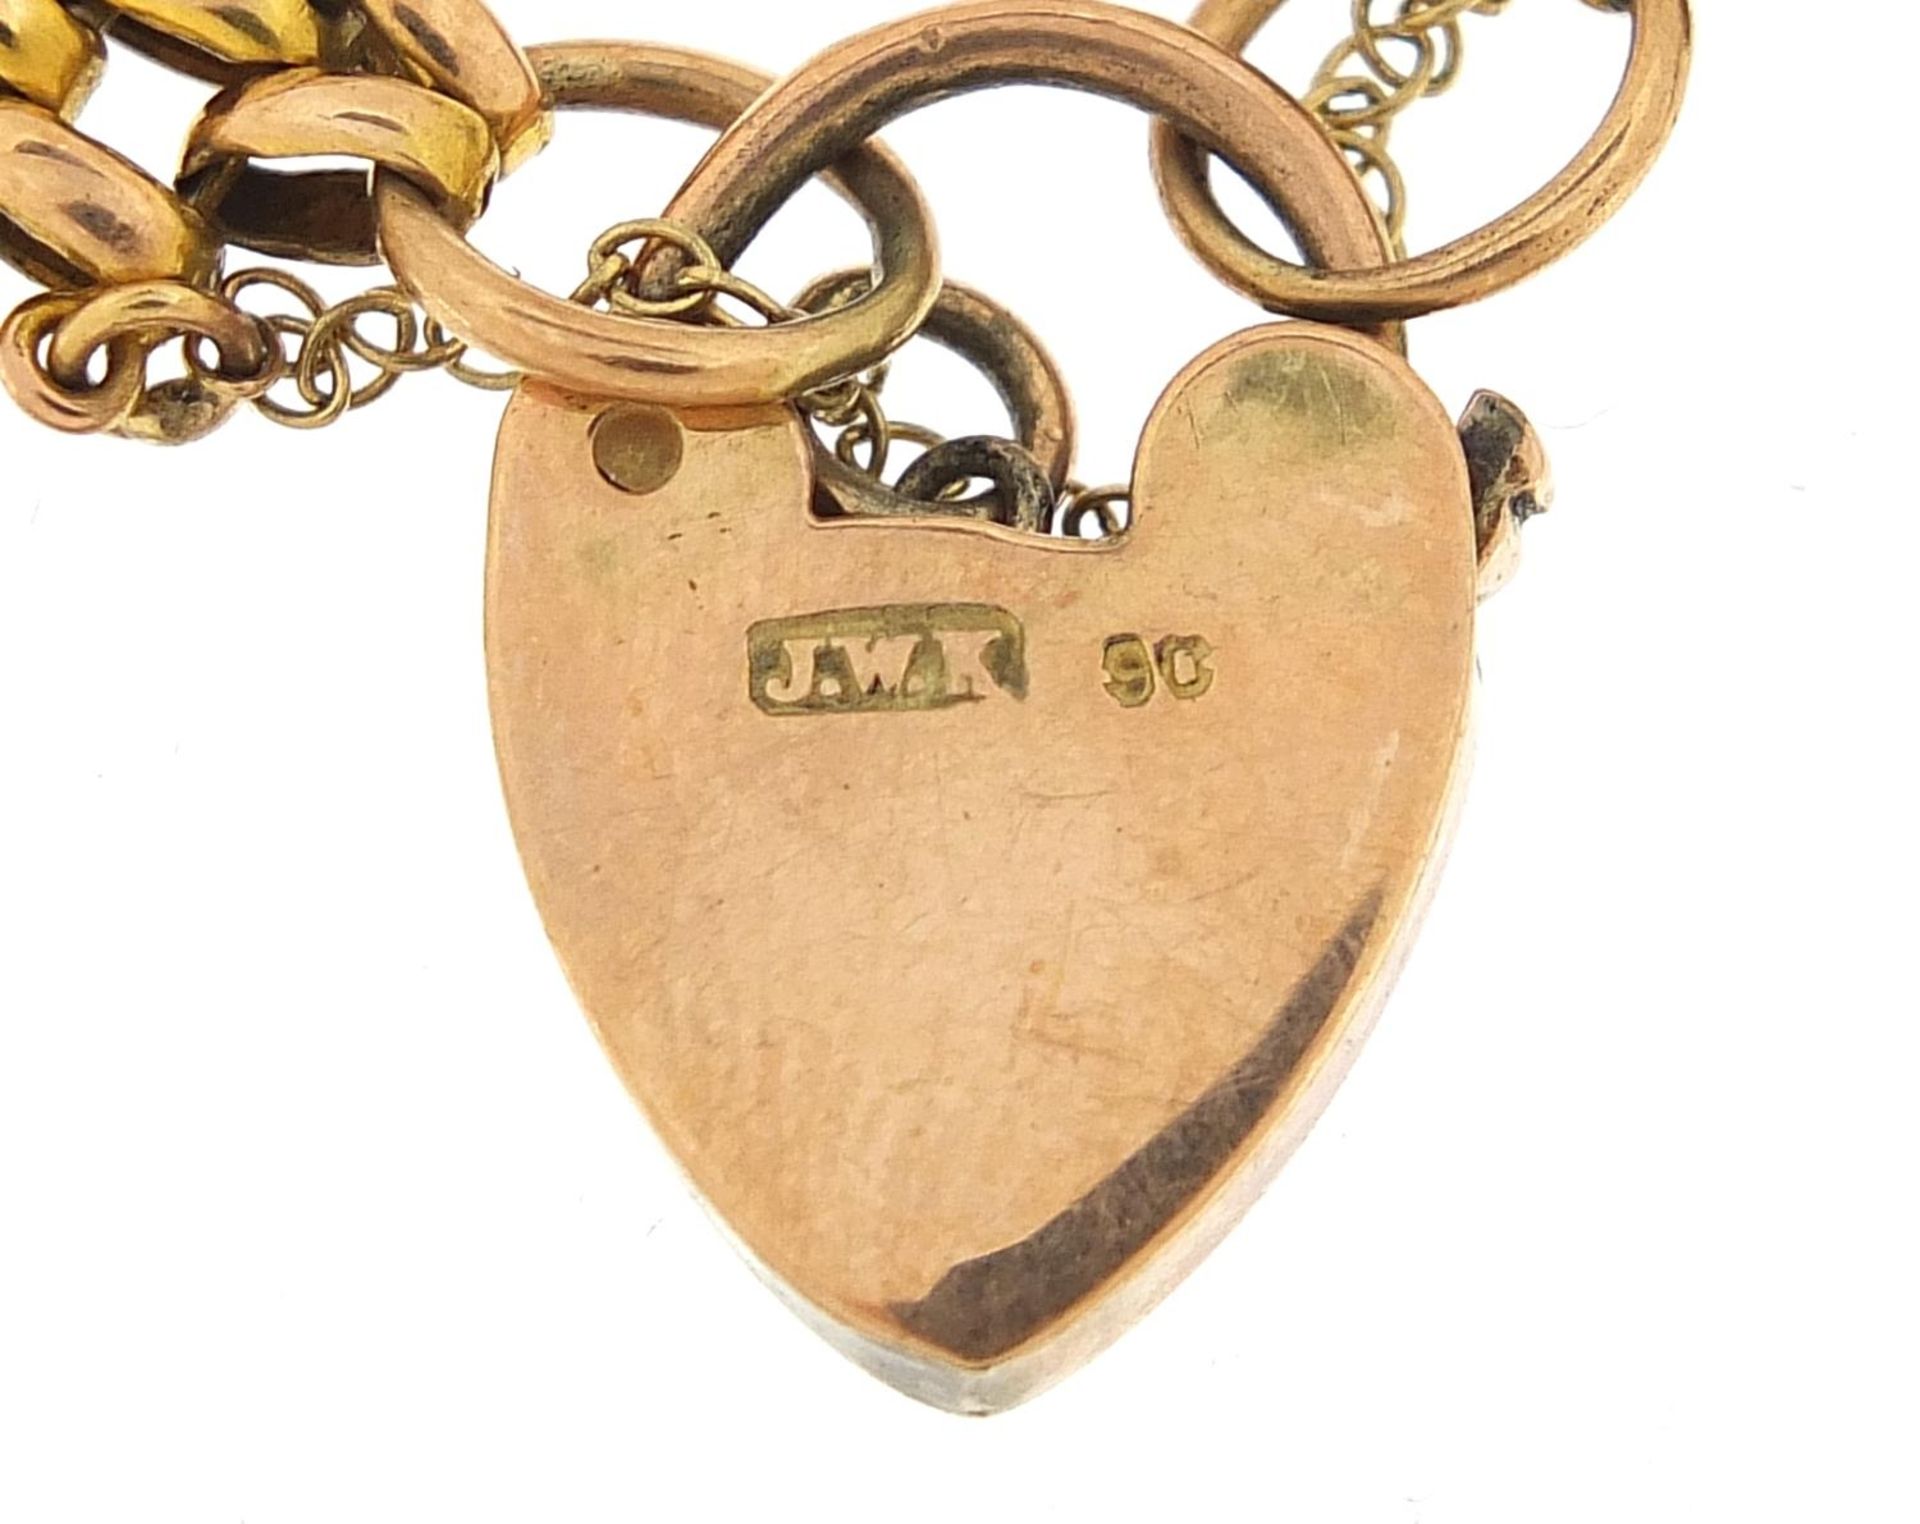 9ct gold four row gate link bracelet with love heart padlock, 16cm in length, 17.6g - this lot is - Image 4 of 4